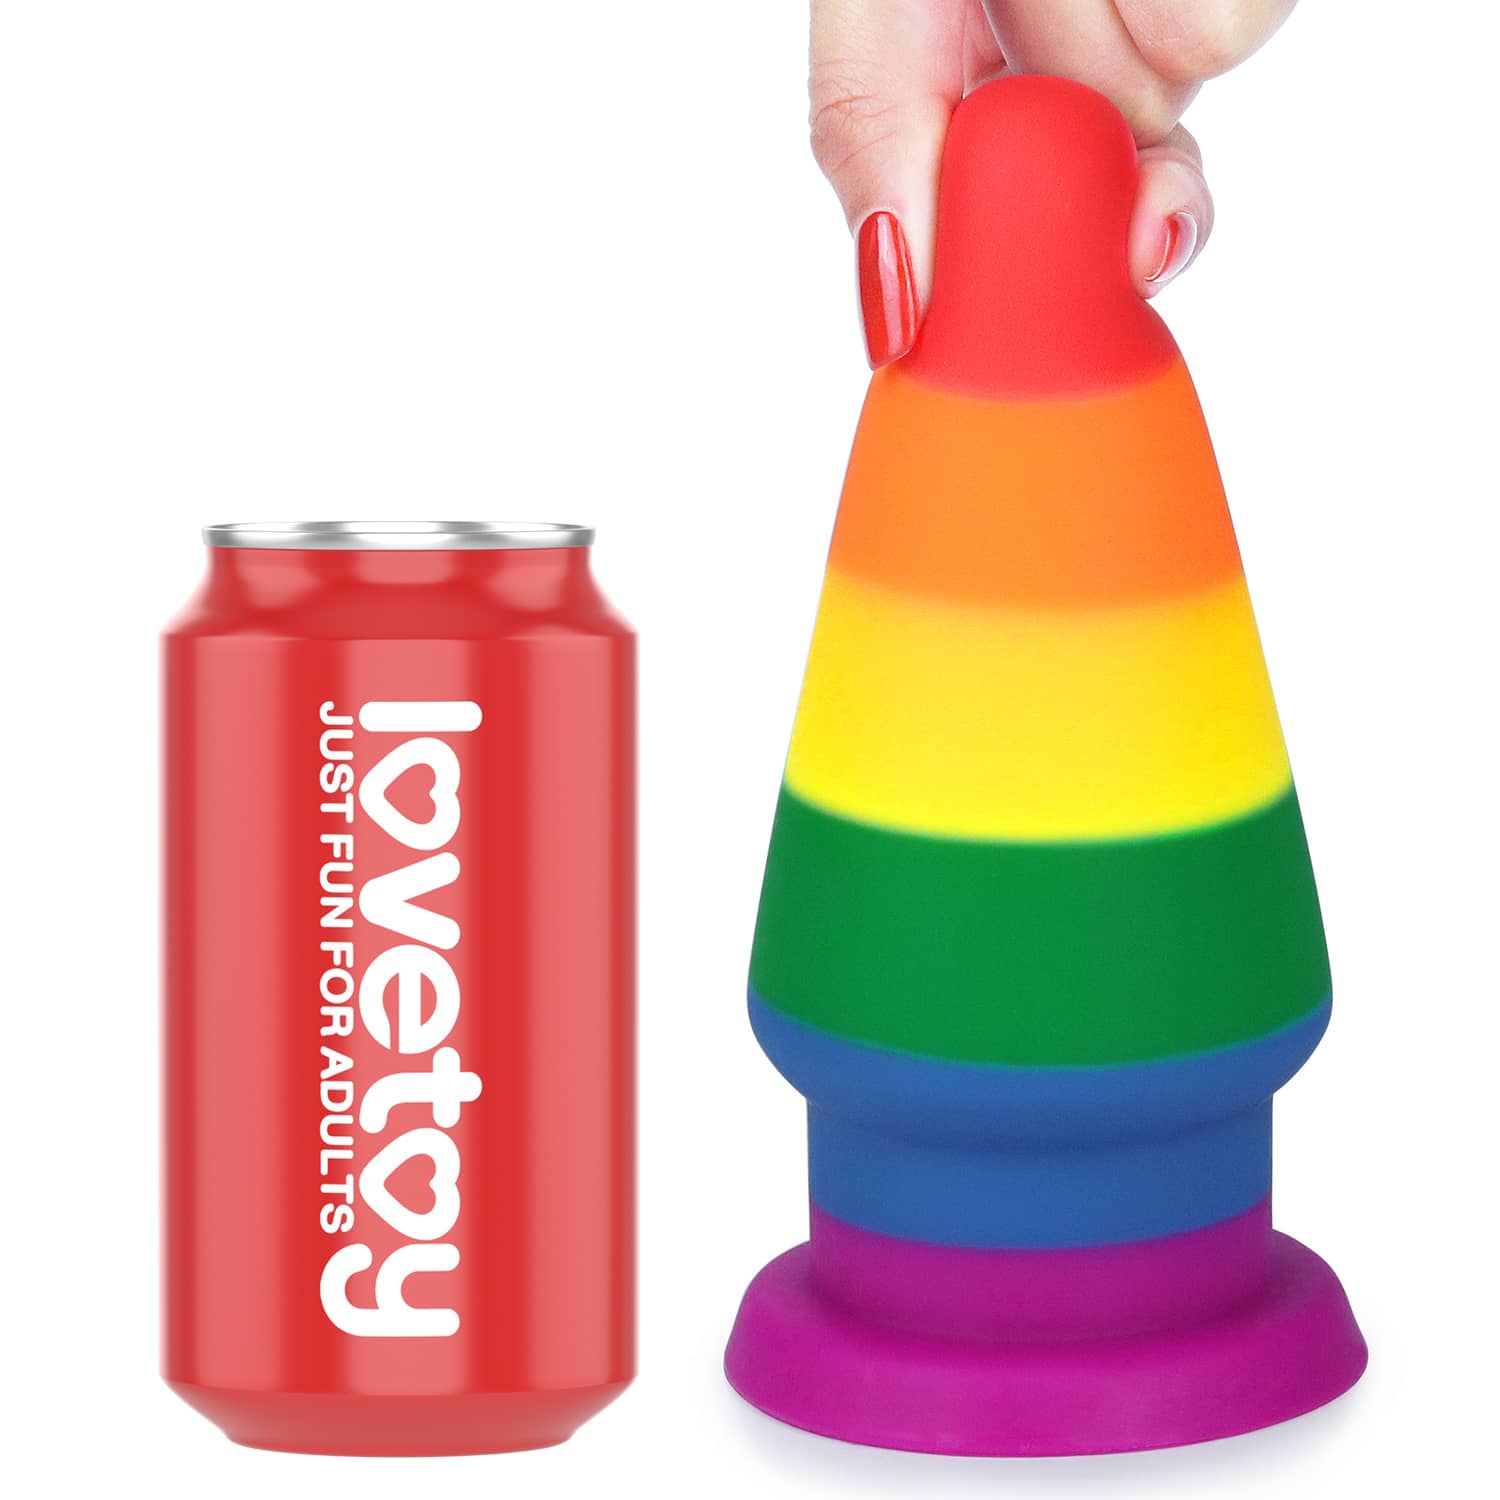 Comparison between the silicone rainbow butt plug anal toy and beverage cans